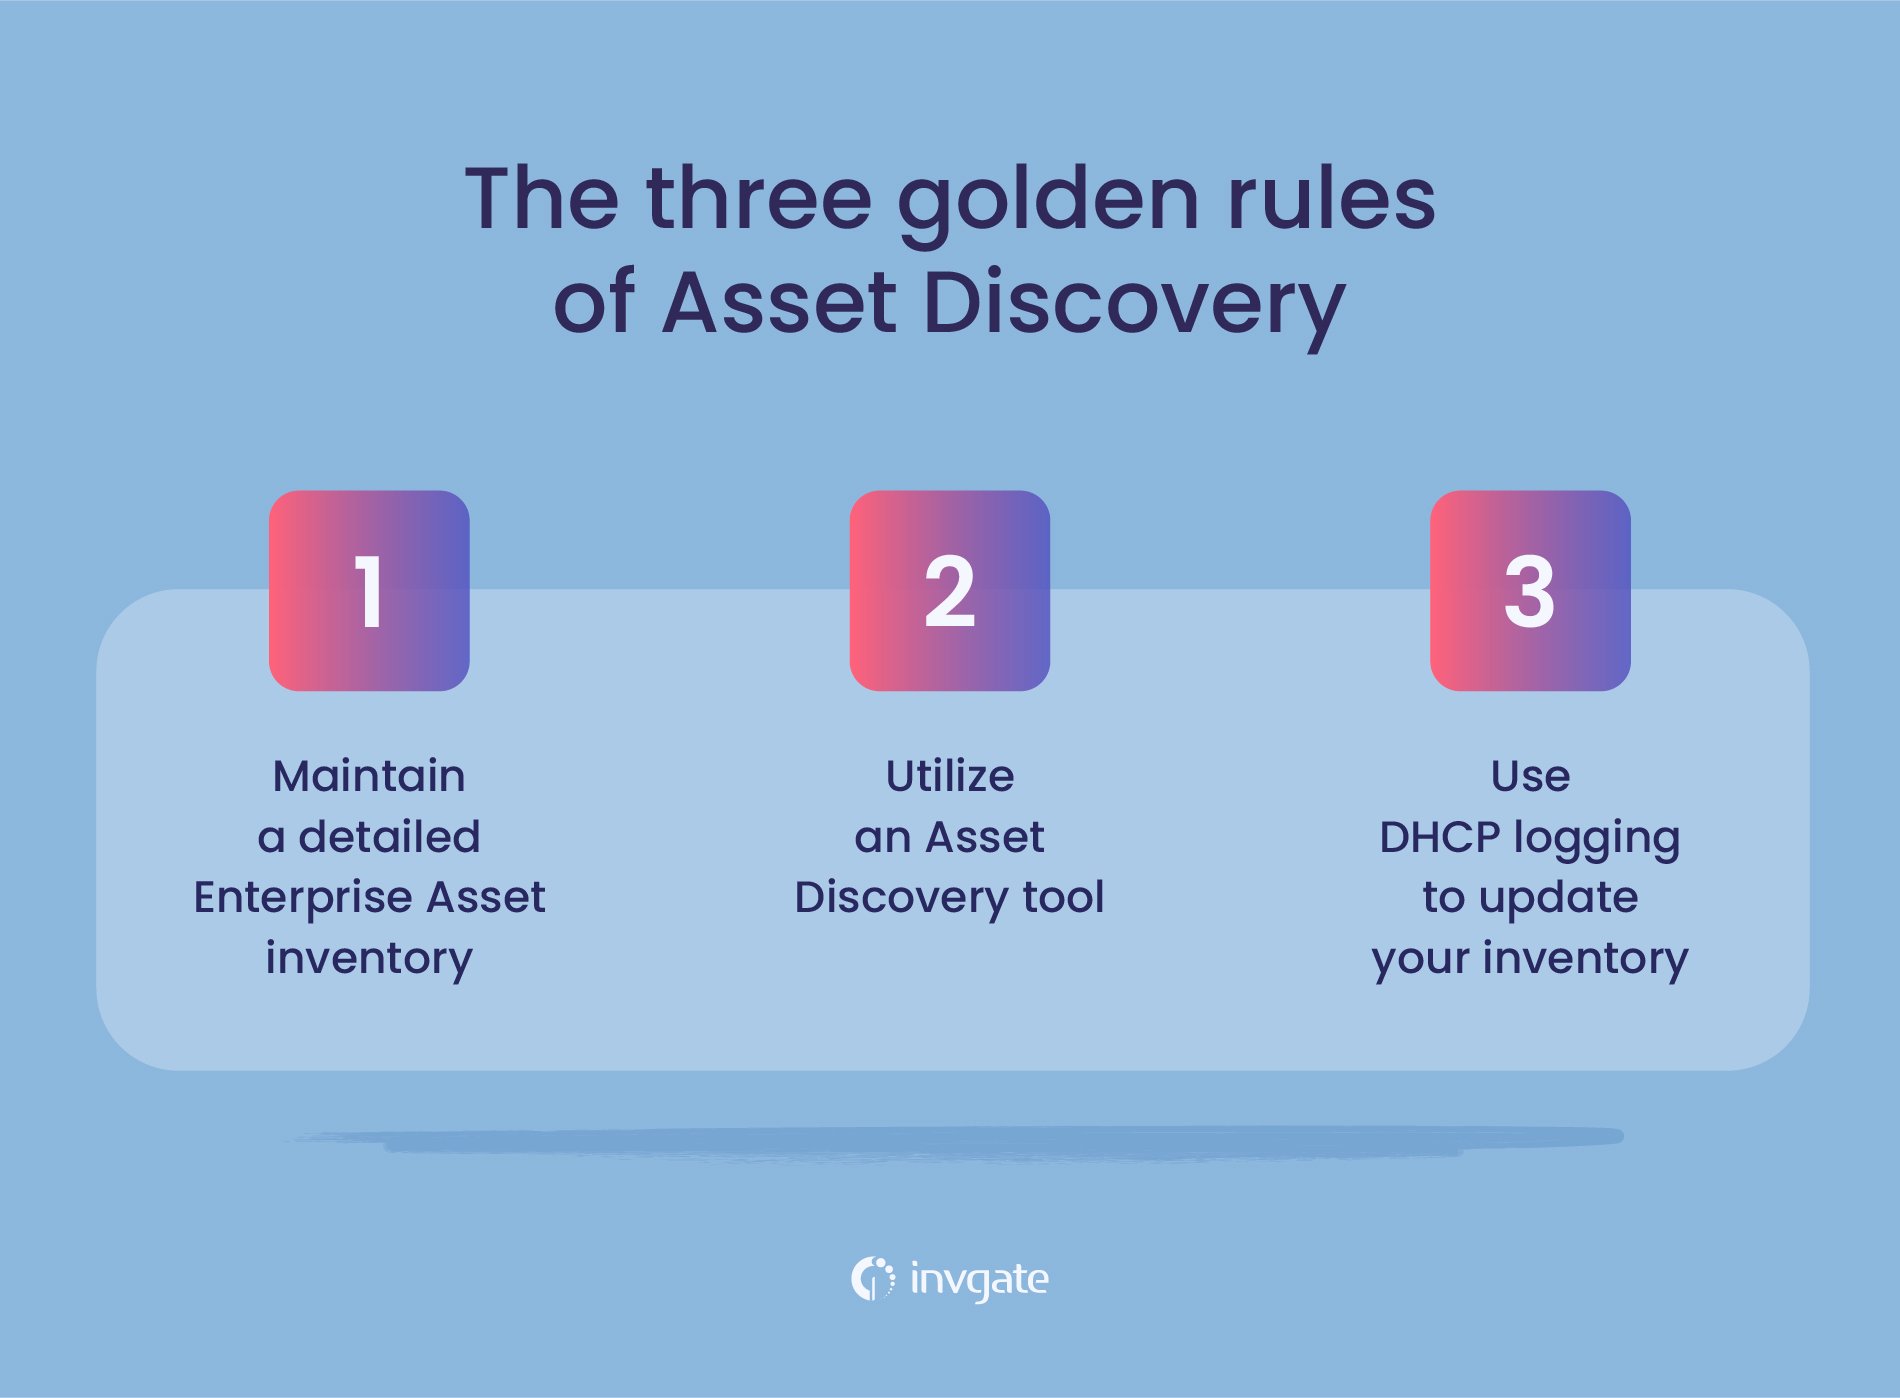 The golden rules of asset discovery